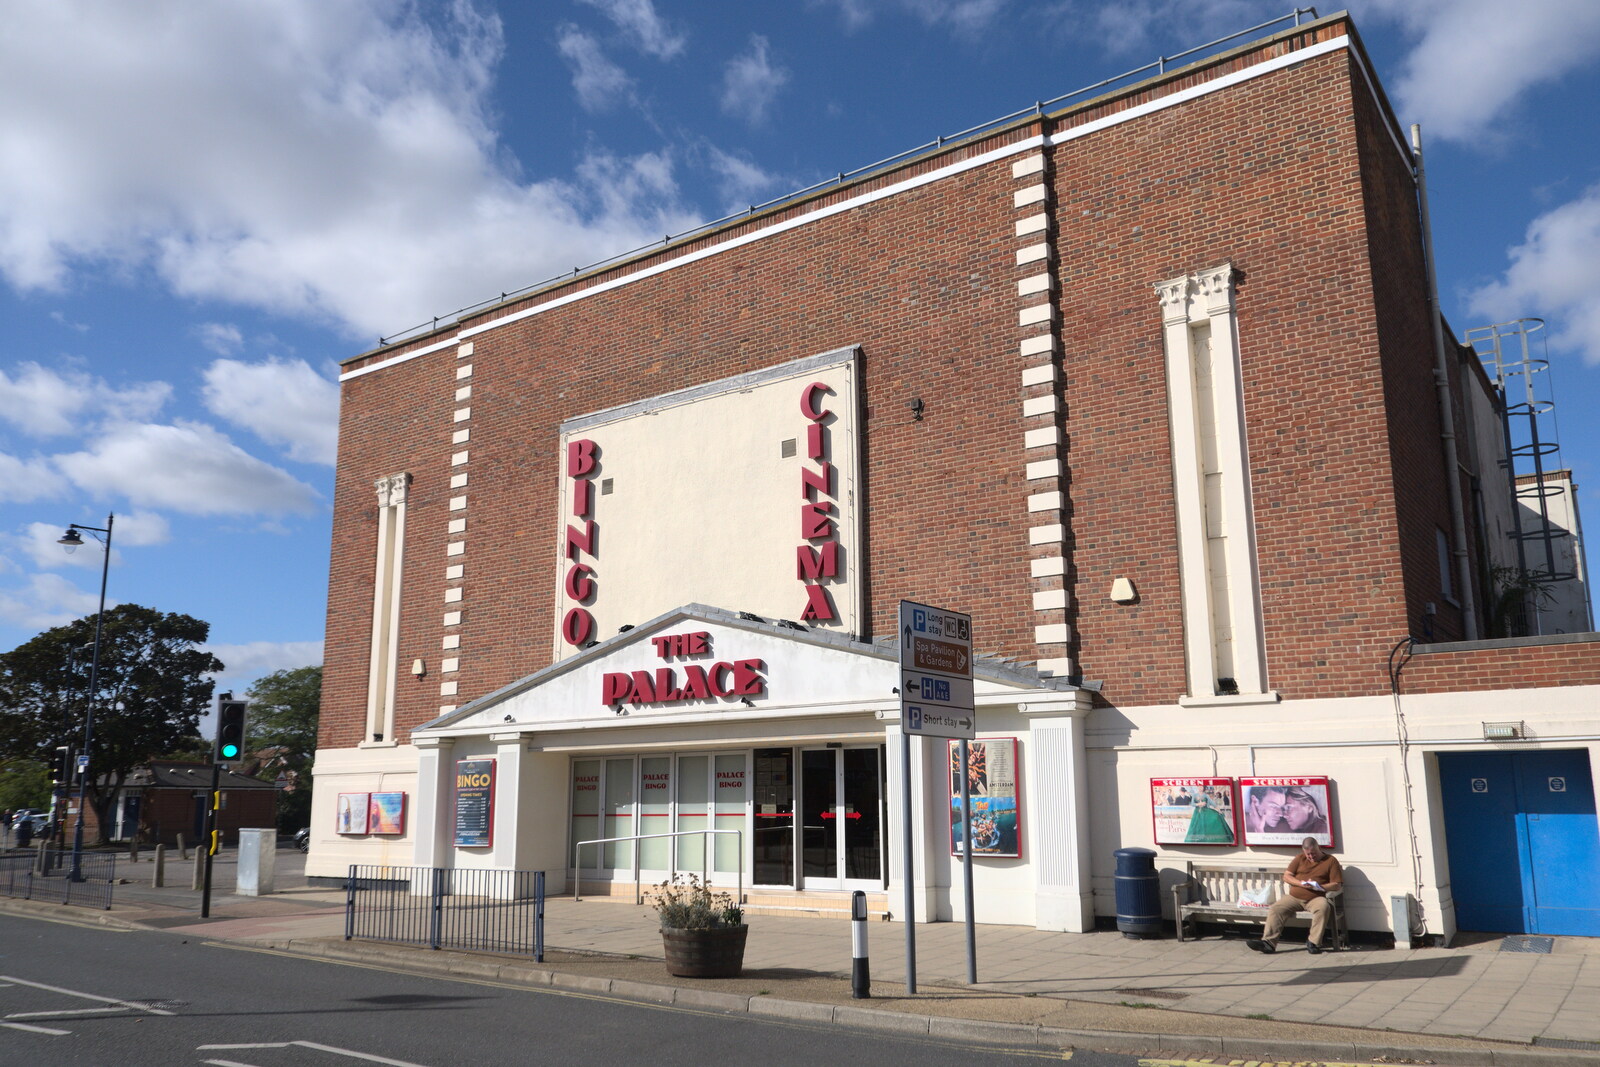 A Postcard from Felixstowe, Suffolk - 5th October 2022: The old-school Palace Cinema and bingo